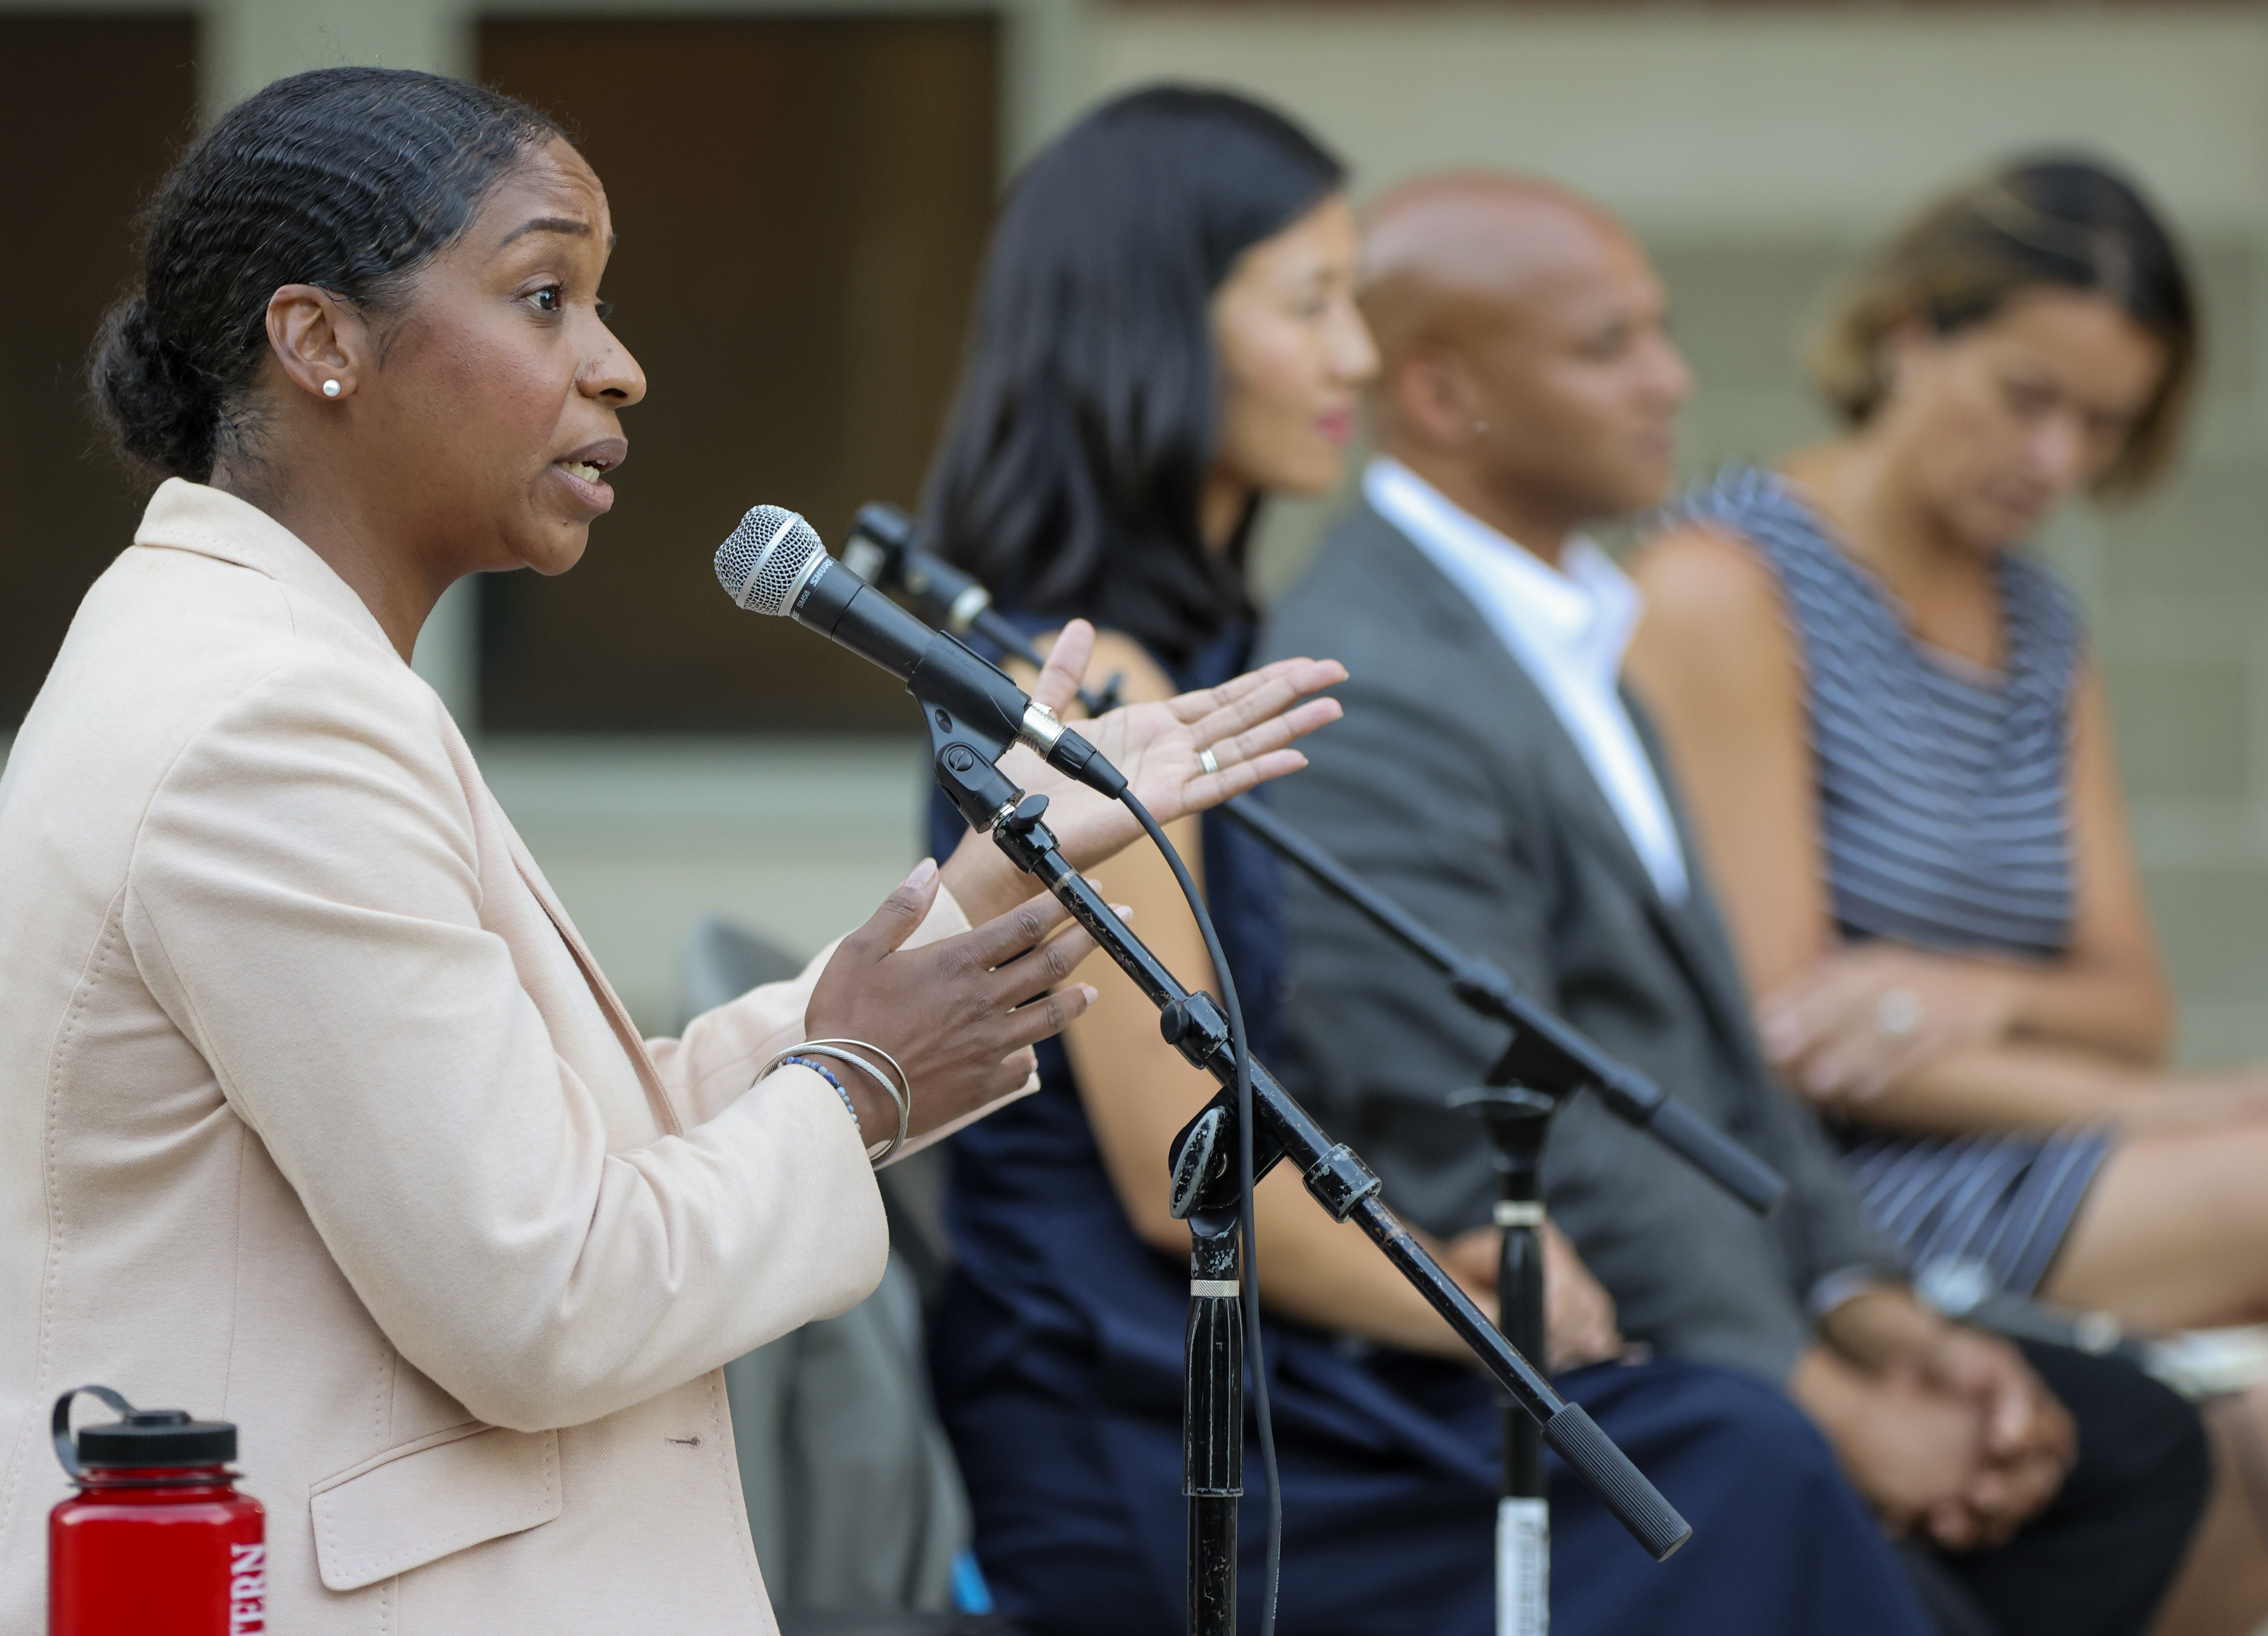 Andrea Campbell spoke during the a town hall forum for candidates running for mayor of Boston outside the Mildred Avenue K-8 School.